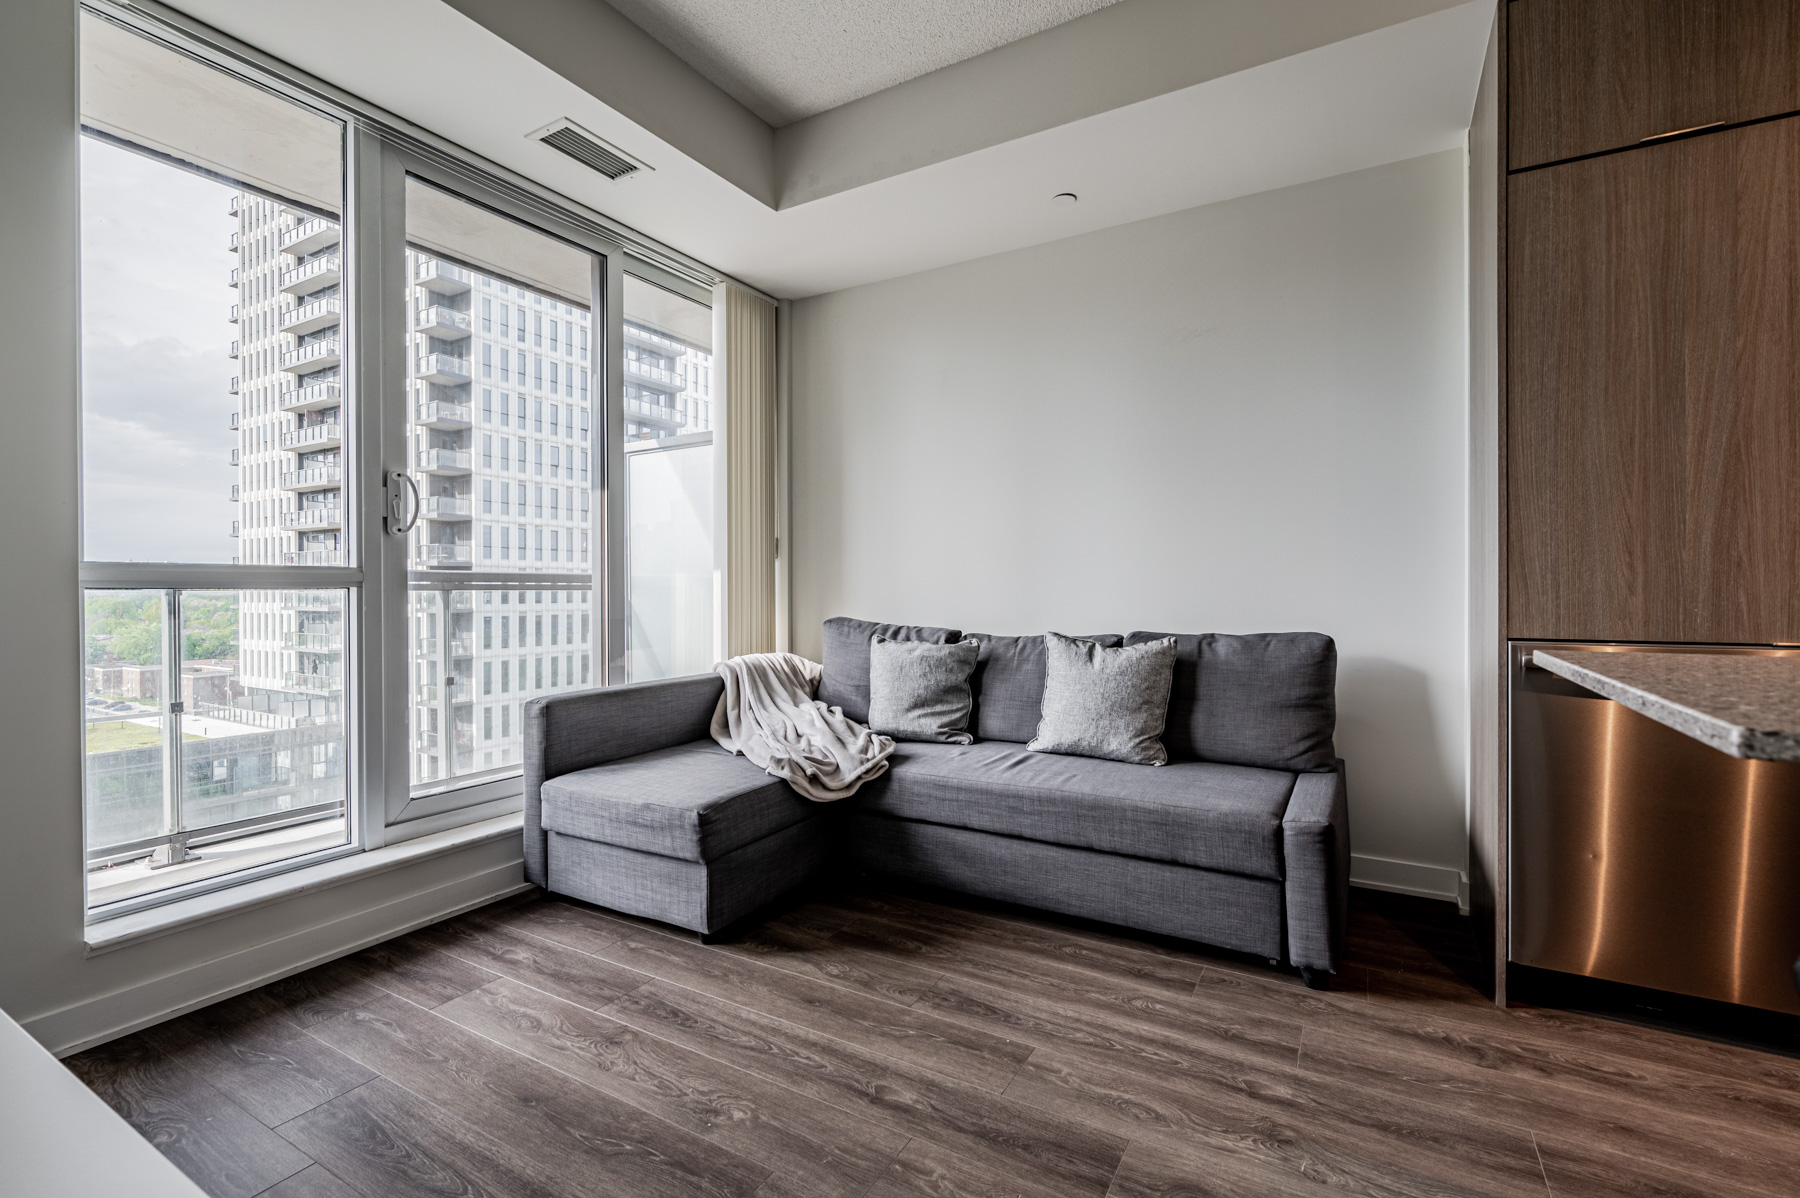 Condo living room with dark, wide-plank laminate floors and gray walls.